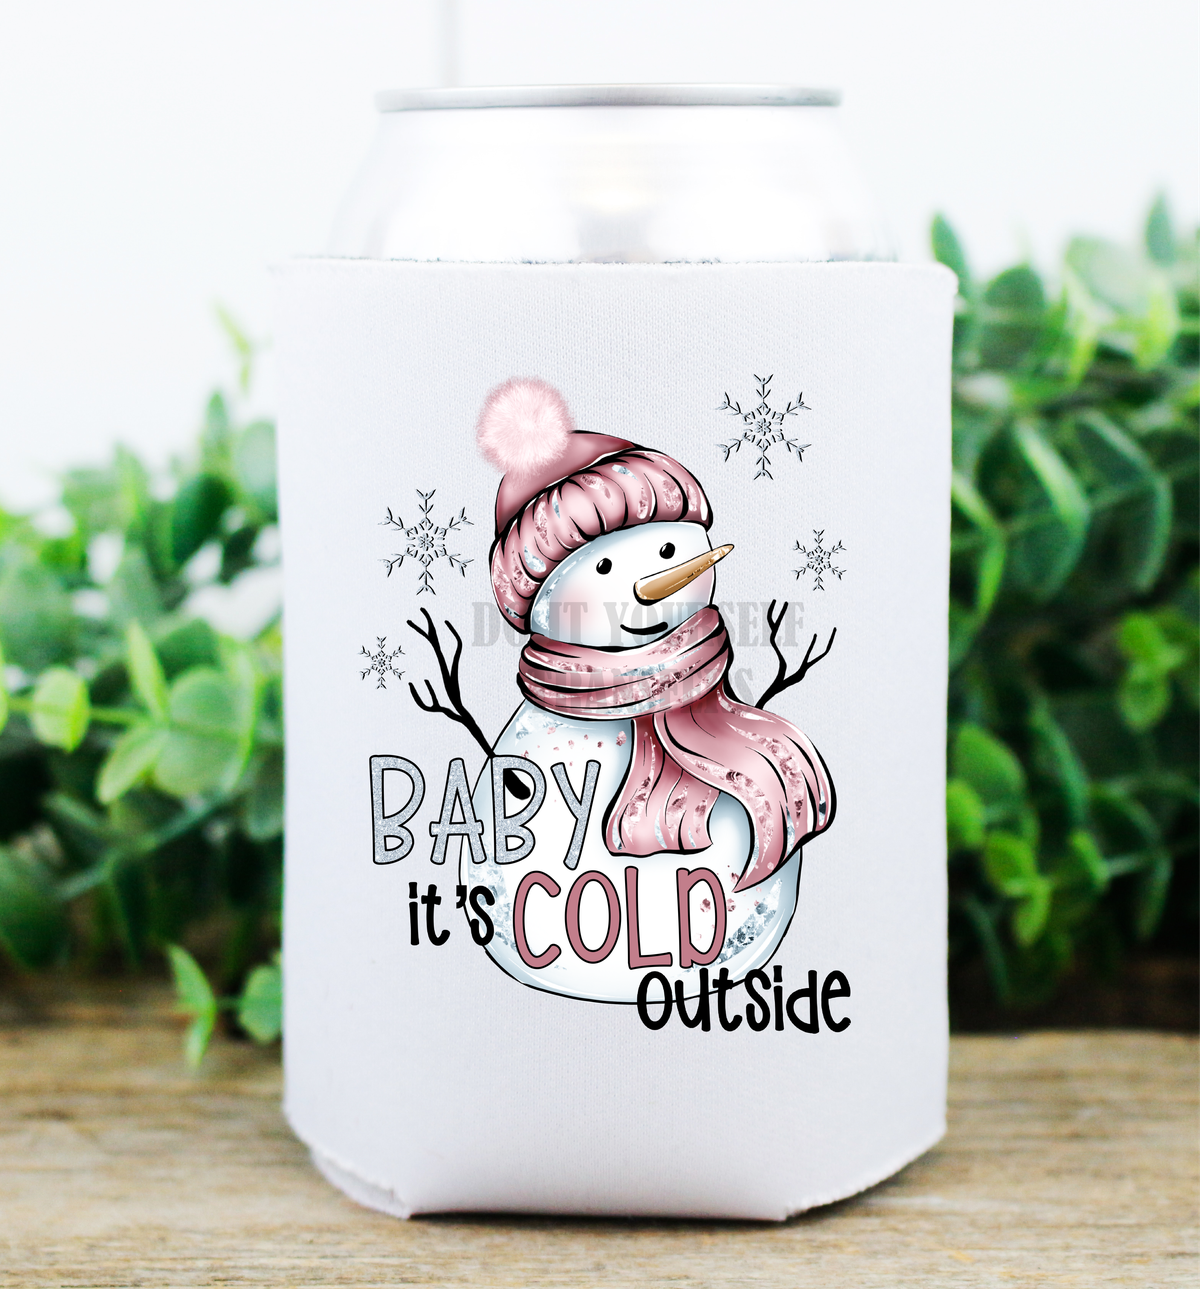 Baby it's cold outside snowman winter pink snowflakes   DTF TRANSFERPRINT TO ORDER